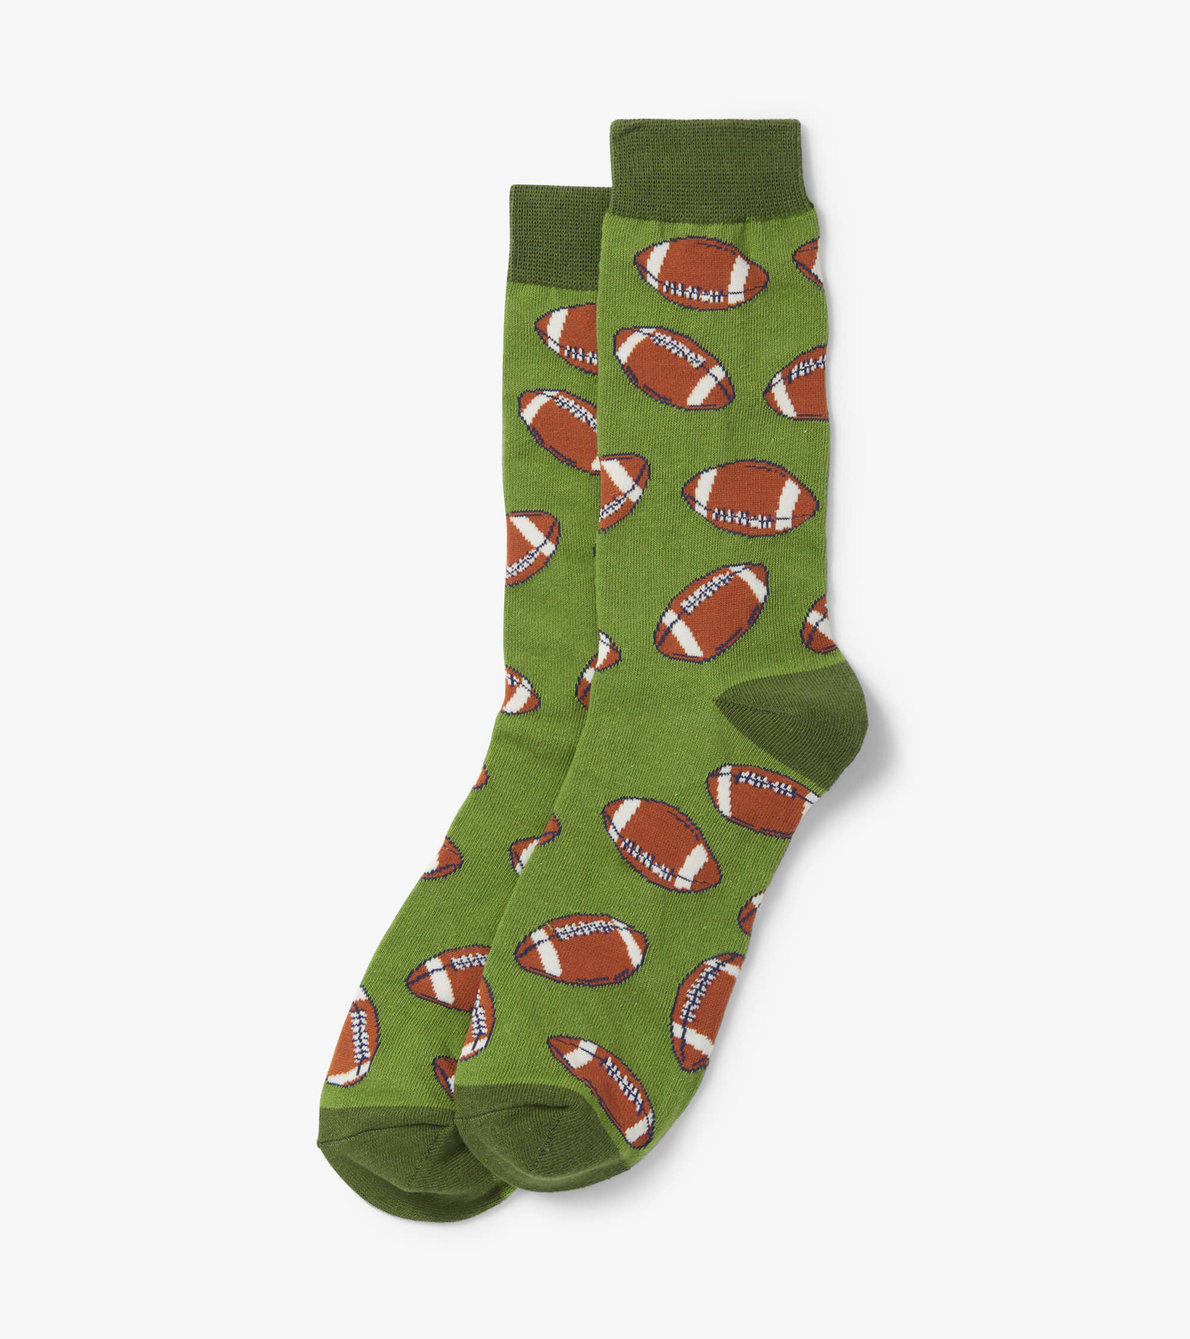 View larger image of Game Of Inches Men's Crew Socks